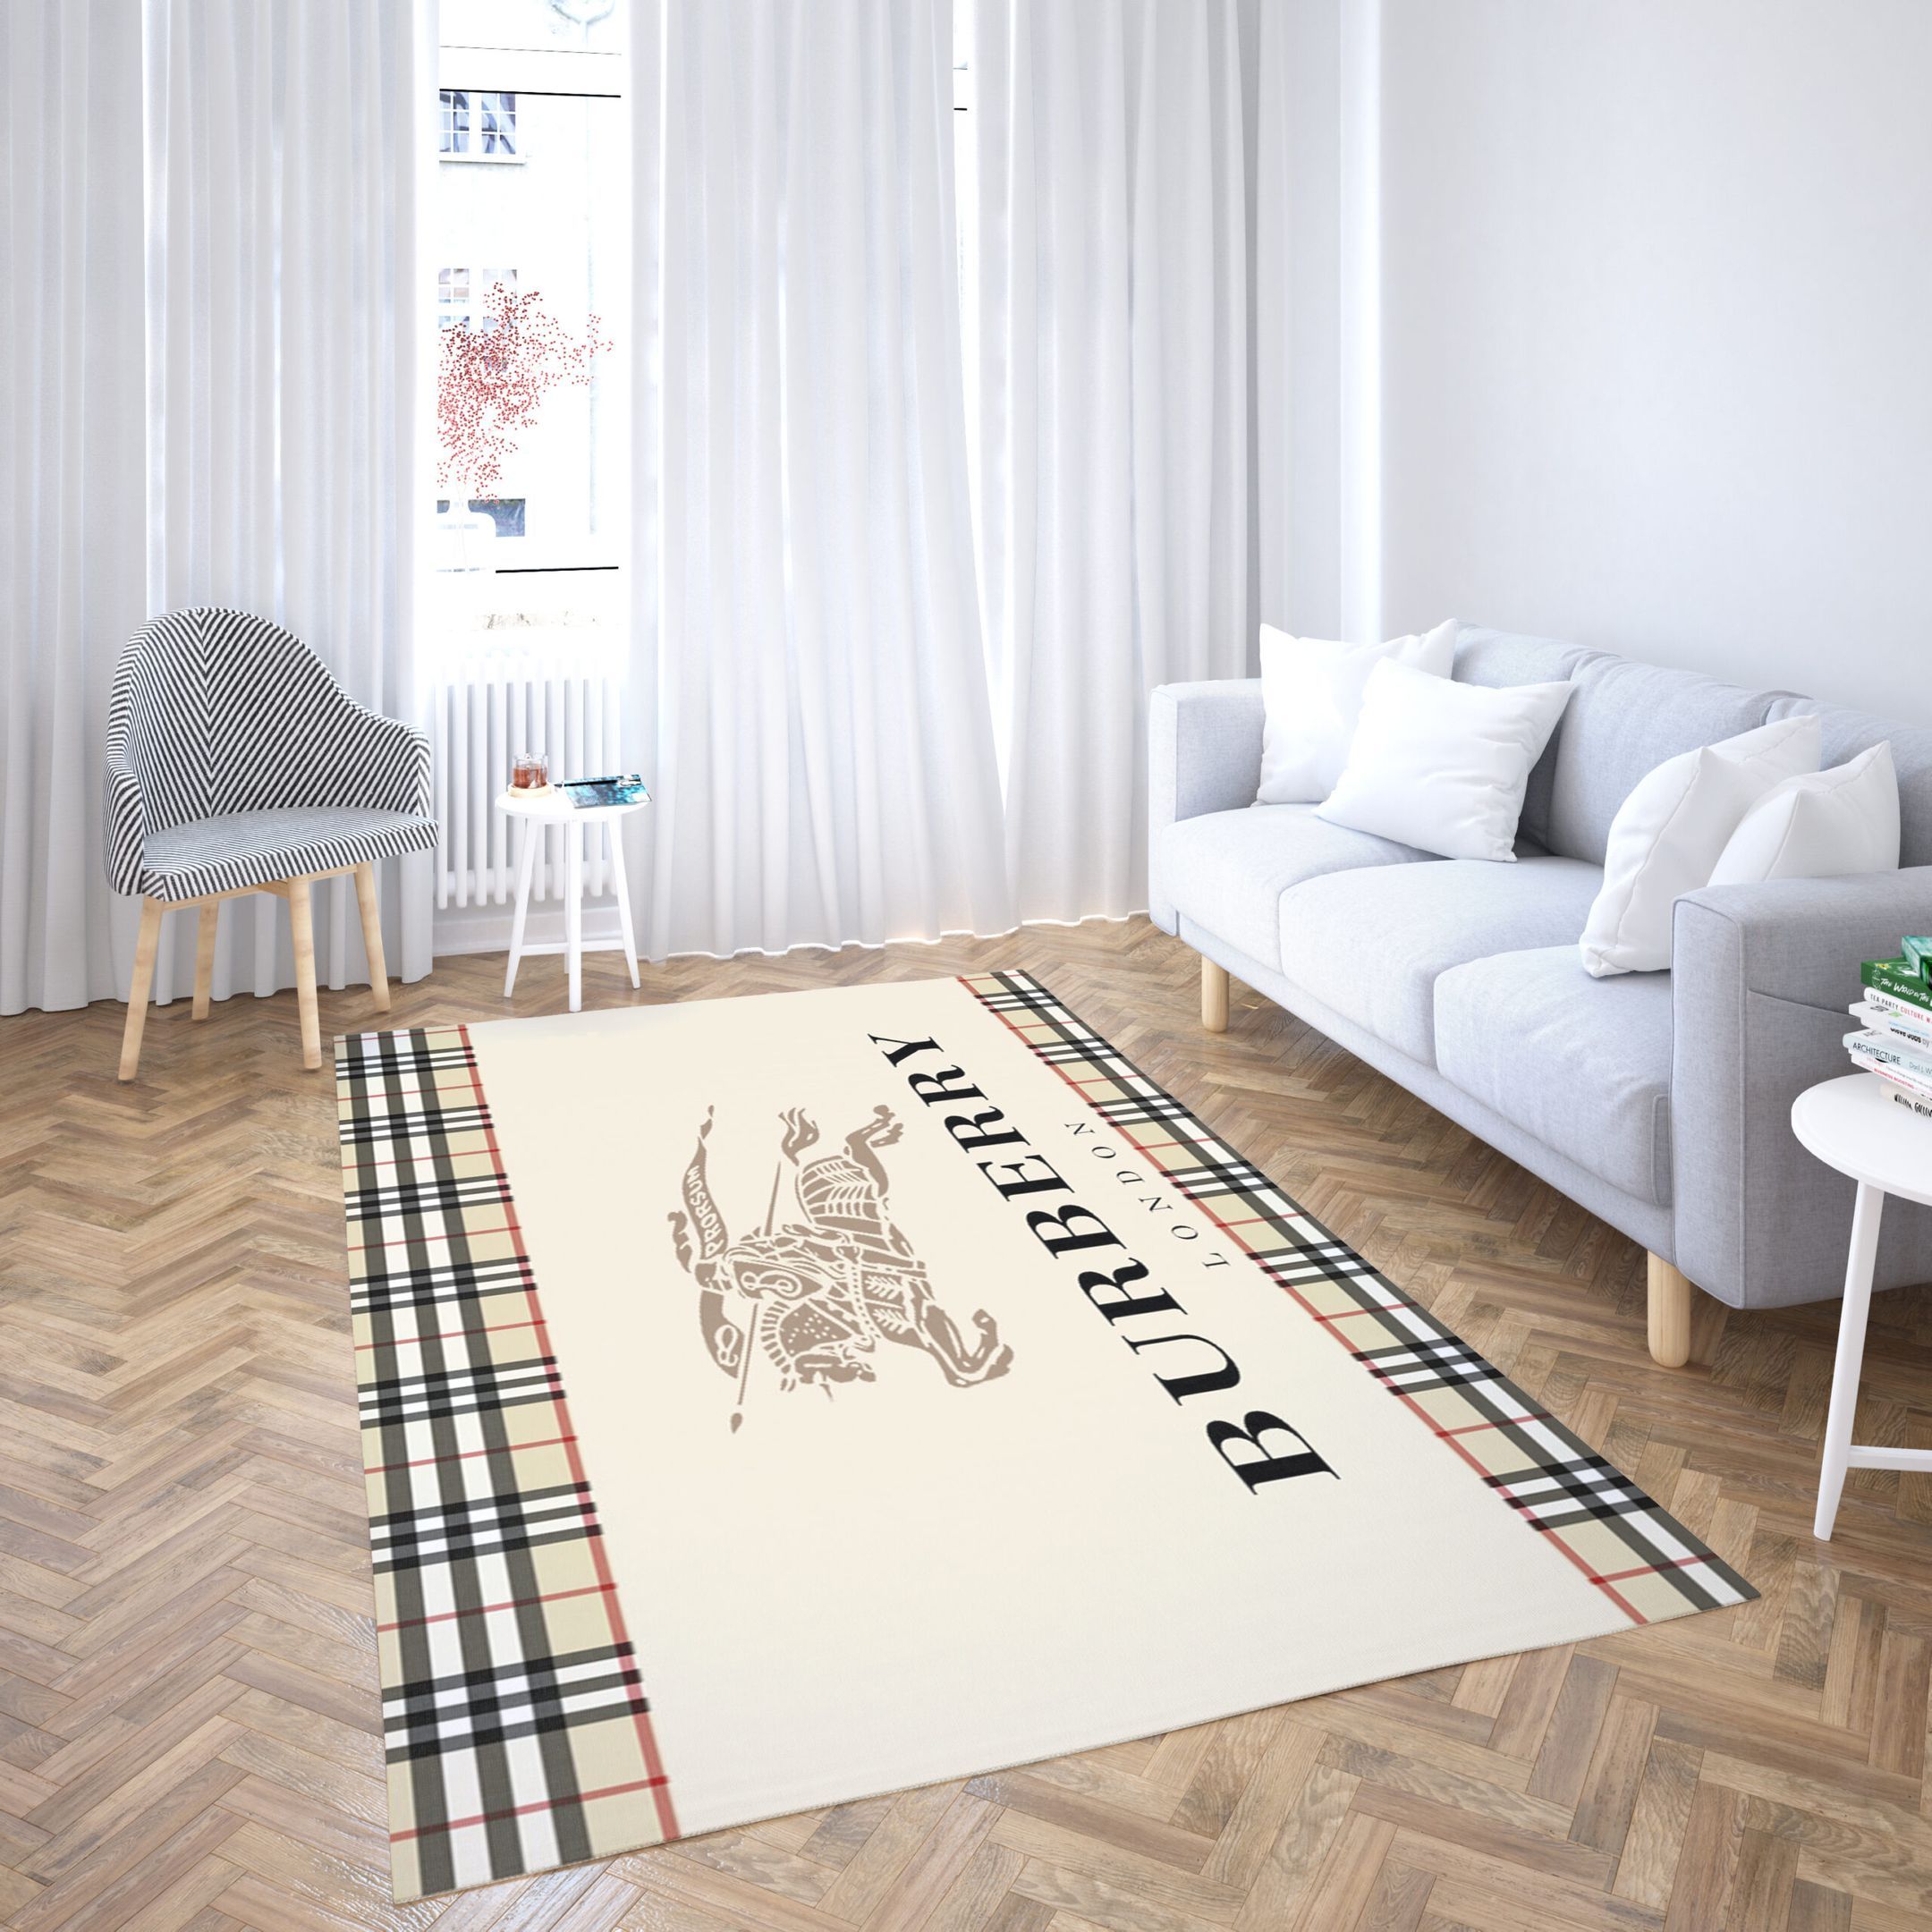 Burberry Luxury Brand 14 Area Rug Living Room And Bedroom Rug Us Gift Decor VH3